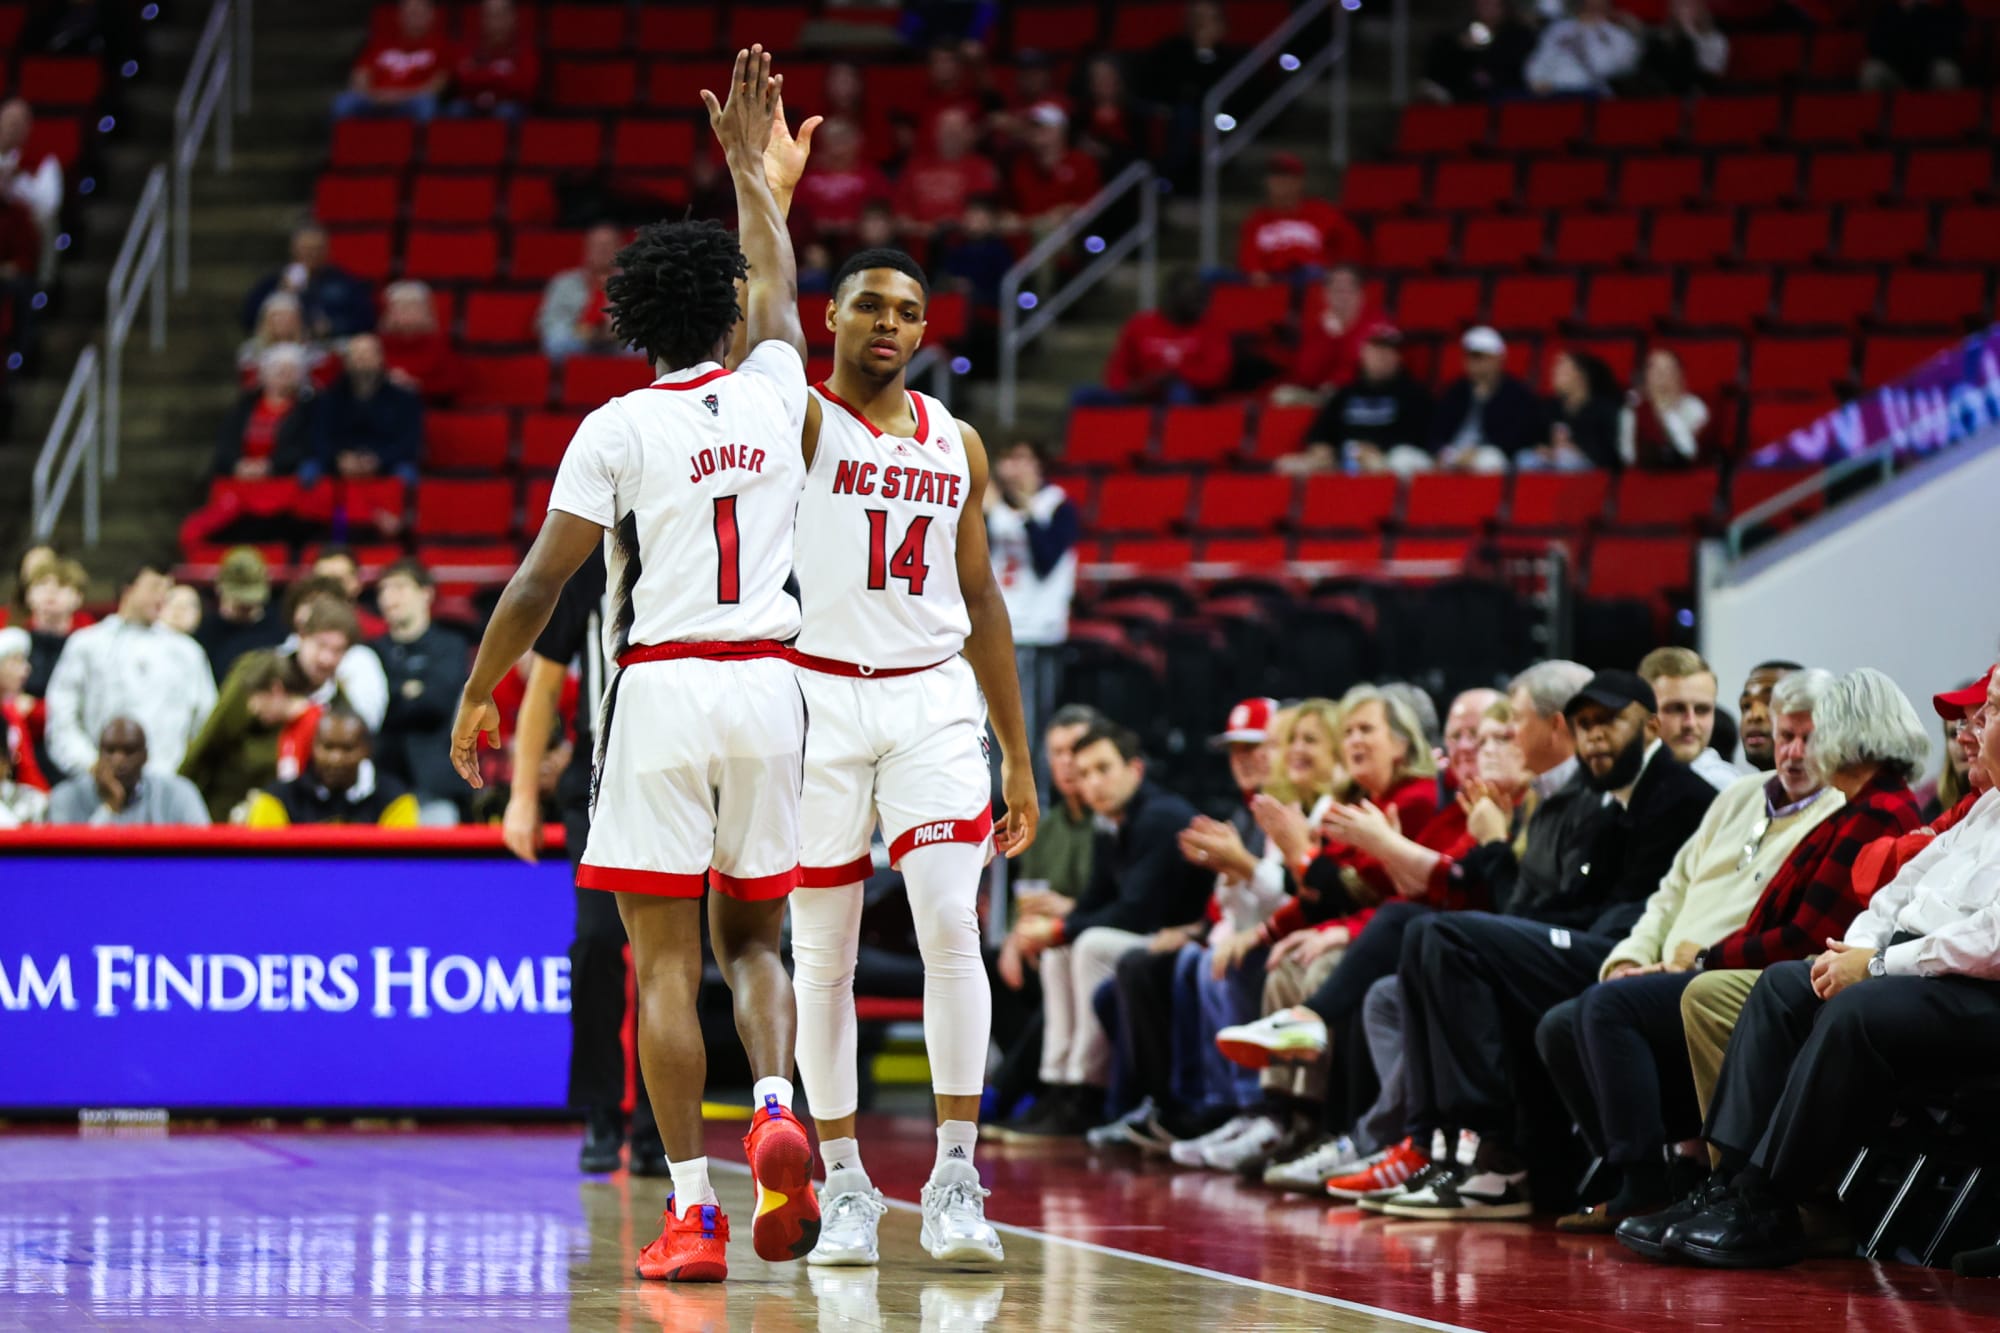 NCAA Basketball: UNC vs NC State among top local/in-state matchups